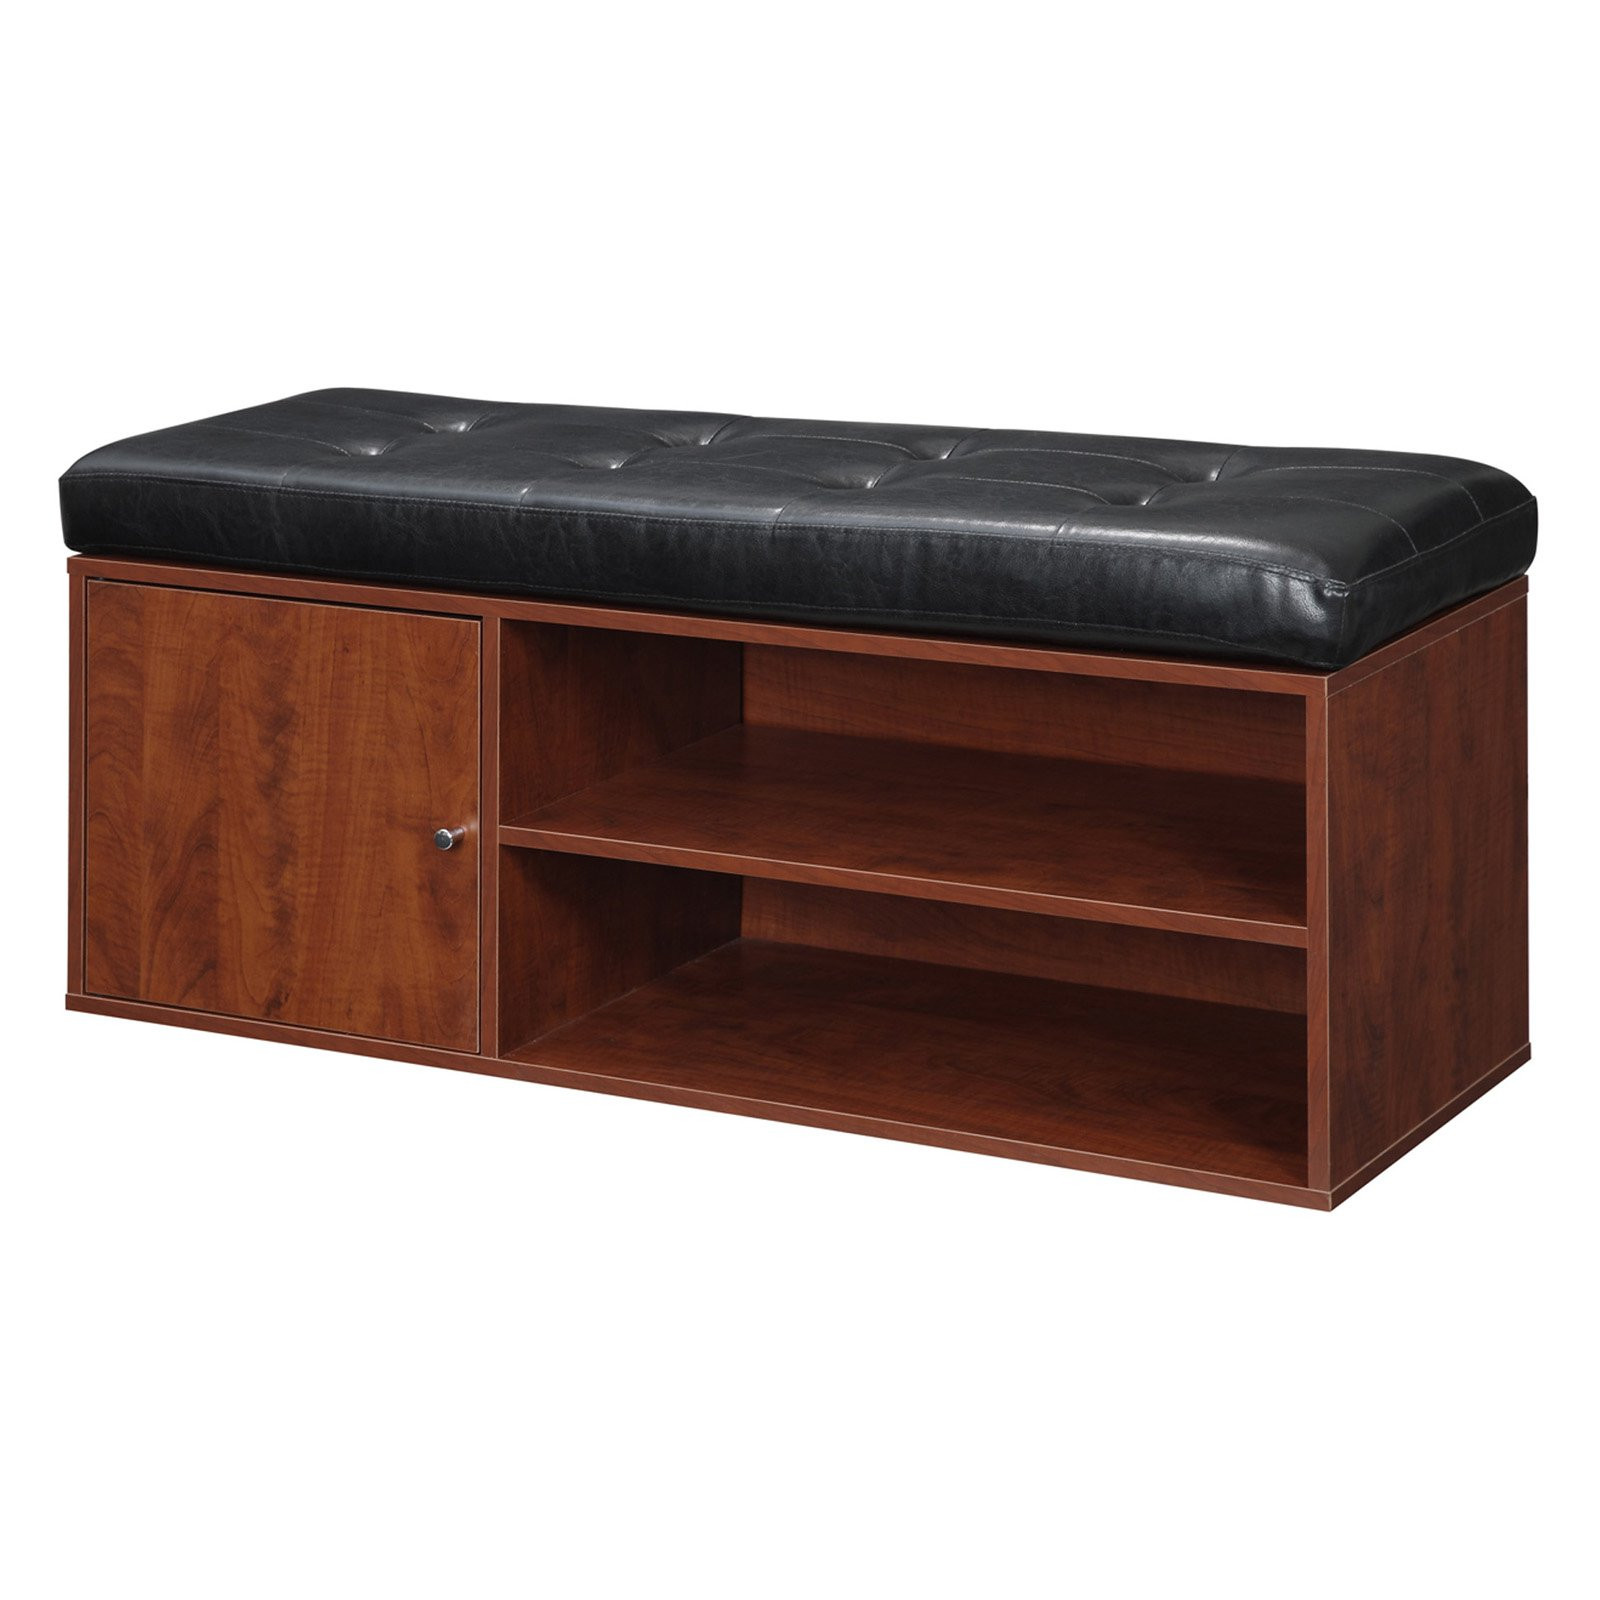 Padded Bench Seat With Storage
 Liberty Upholstered Padded Seat Storage Bench Black Cherry